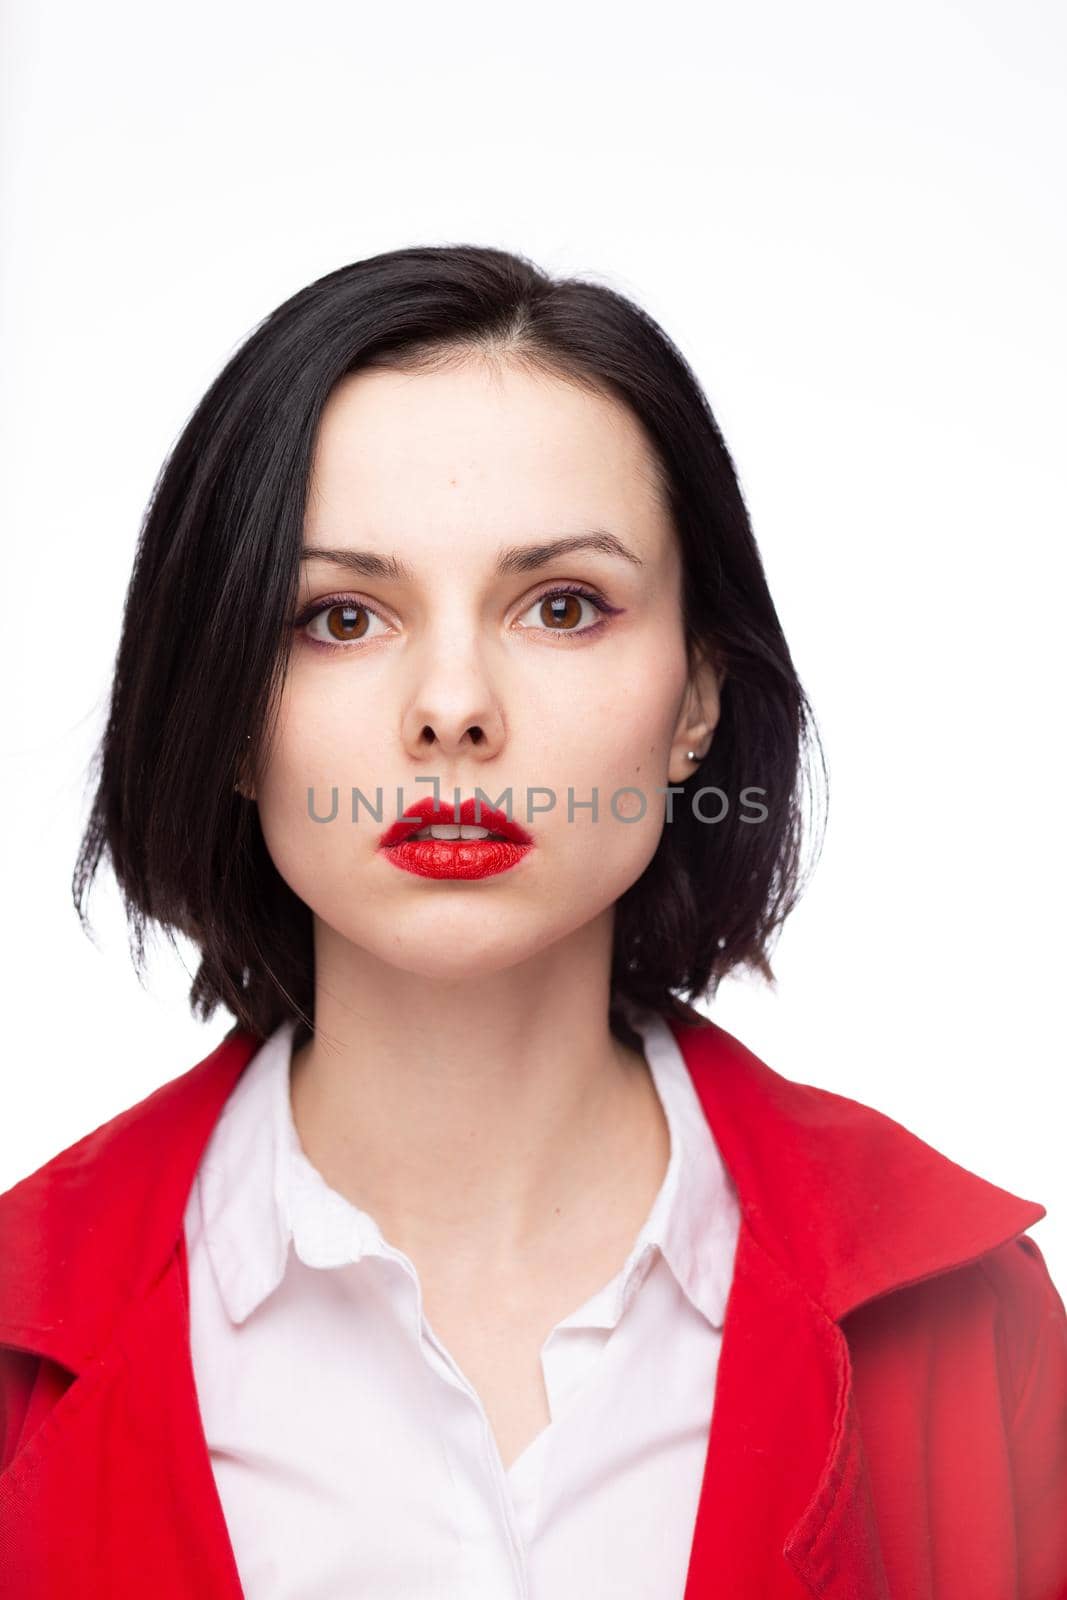 brunette woman with red lipstick on her lips in a red jacket and white shirt, white background. High quality photo